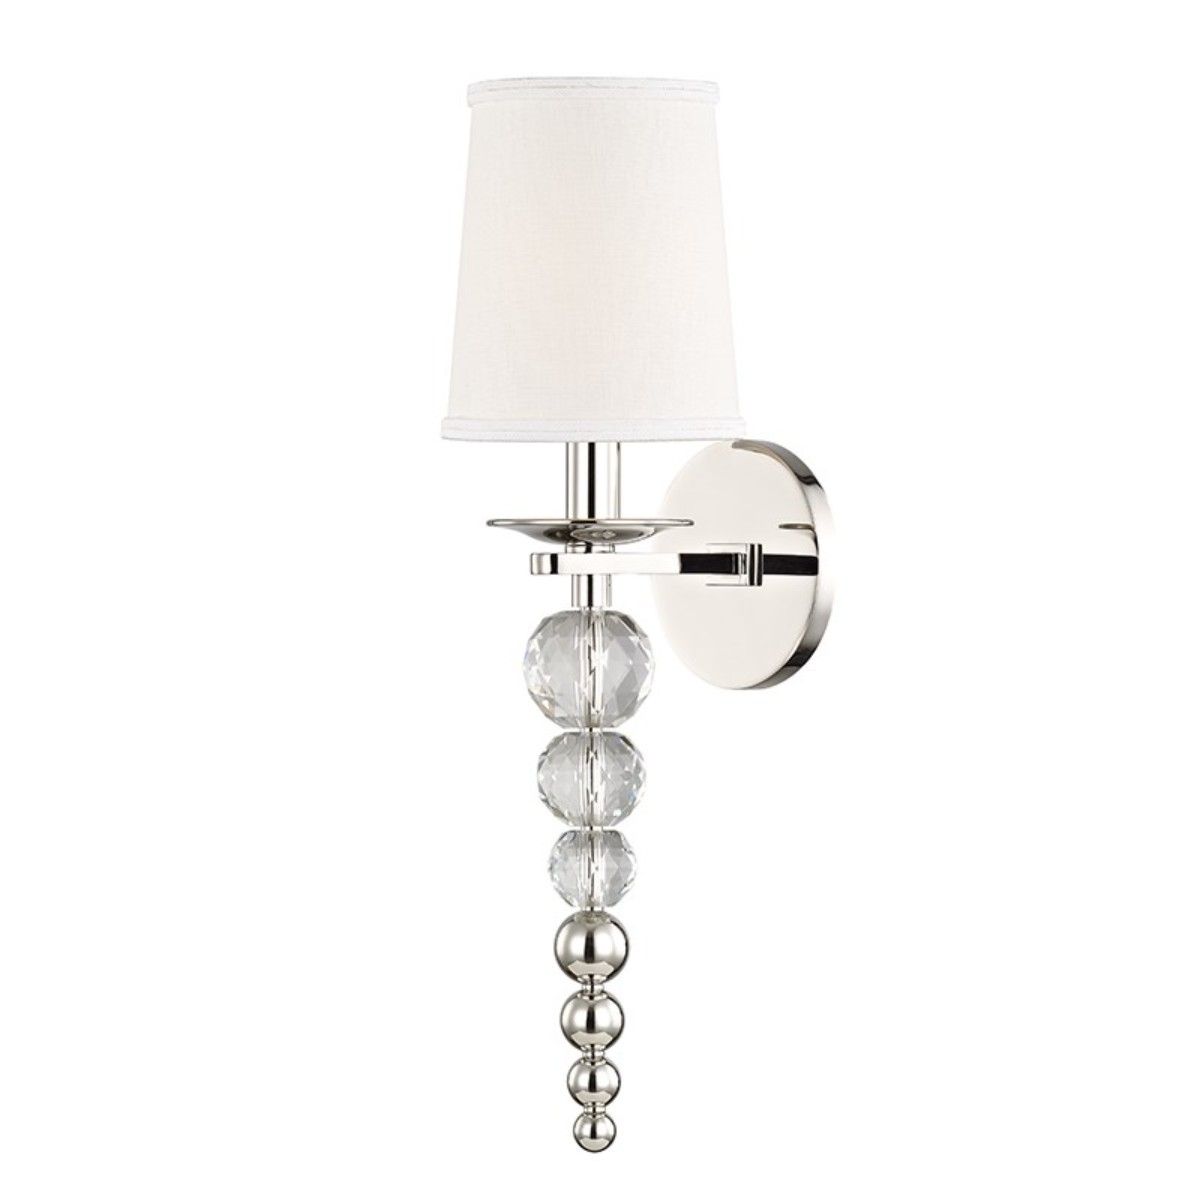 Hudson Valley I Persis Wall Sconce I Polished Nickel